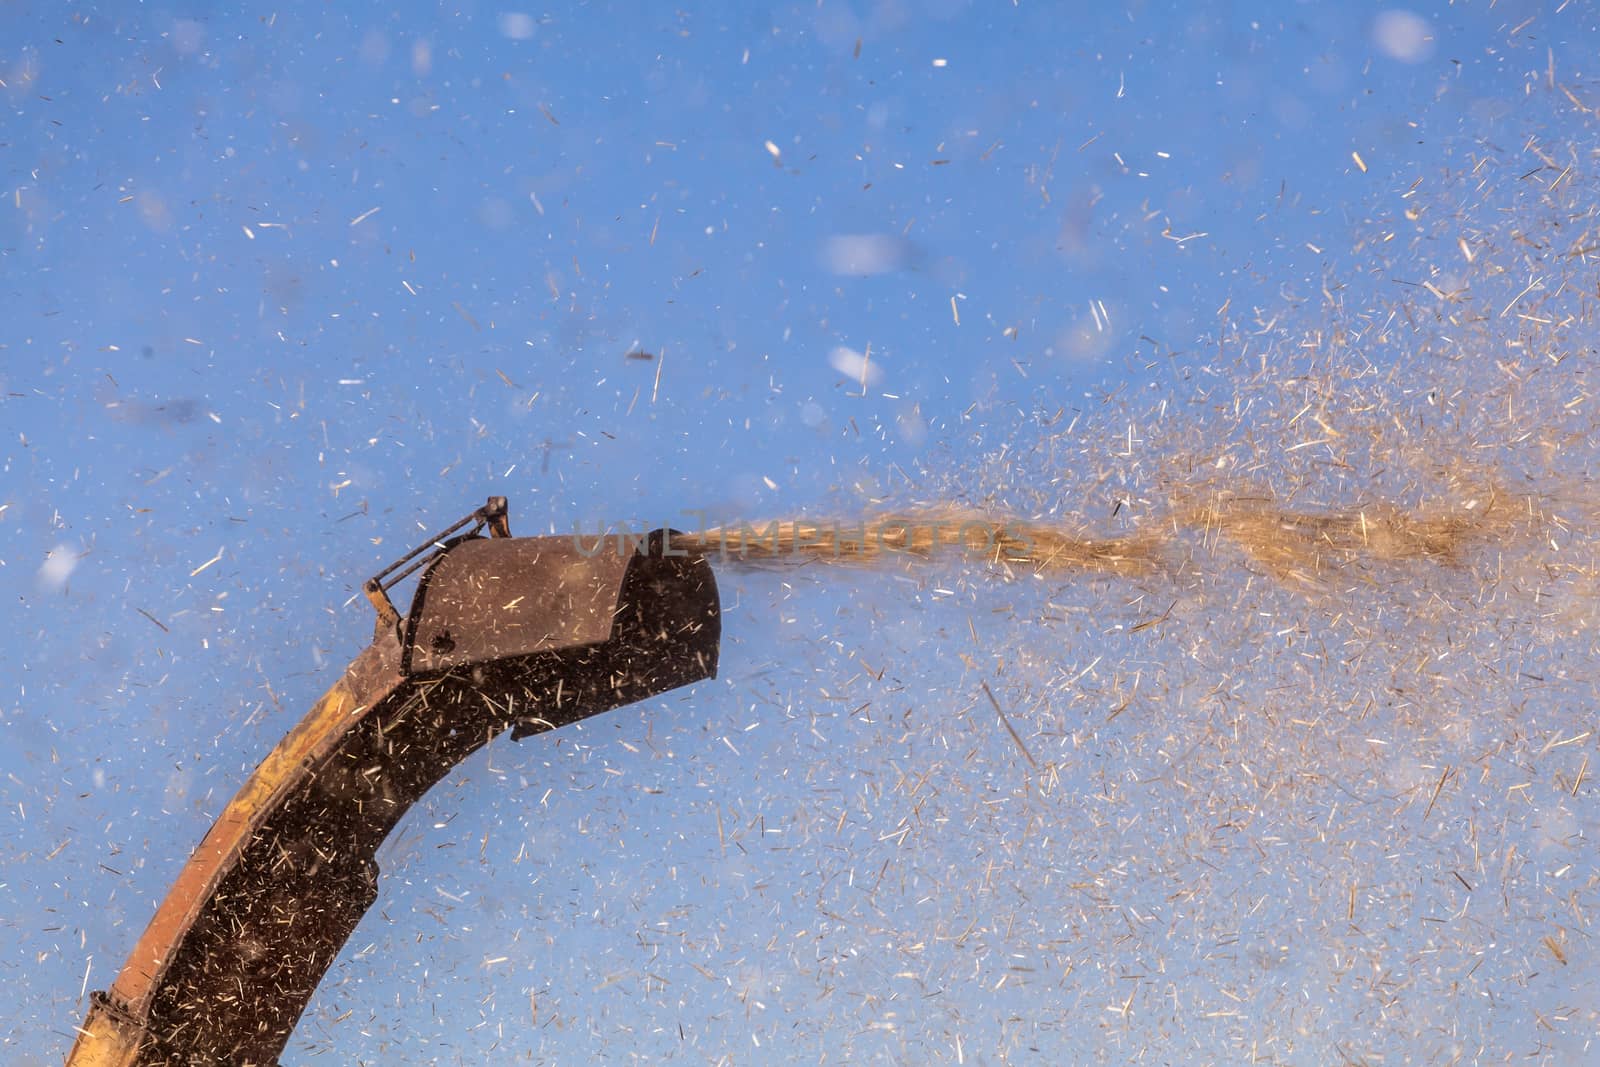 Straw flying from a harvester, close-up against the sky by fogen